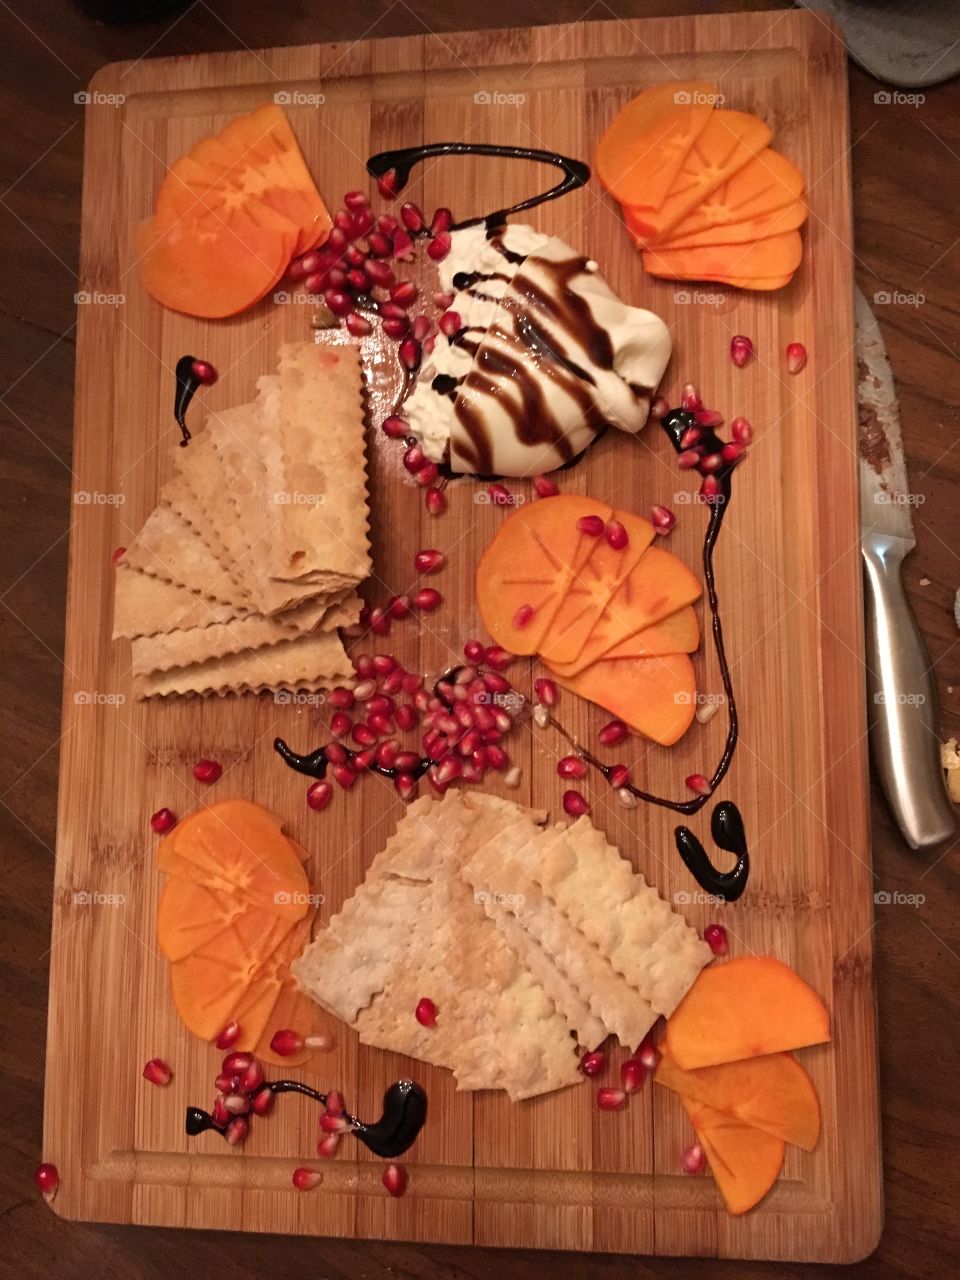 Cheese plate with burrata, pomegranate, persimmon, and a balsamic drizzle spread out on a wooden platter